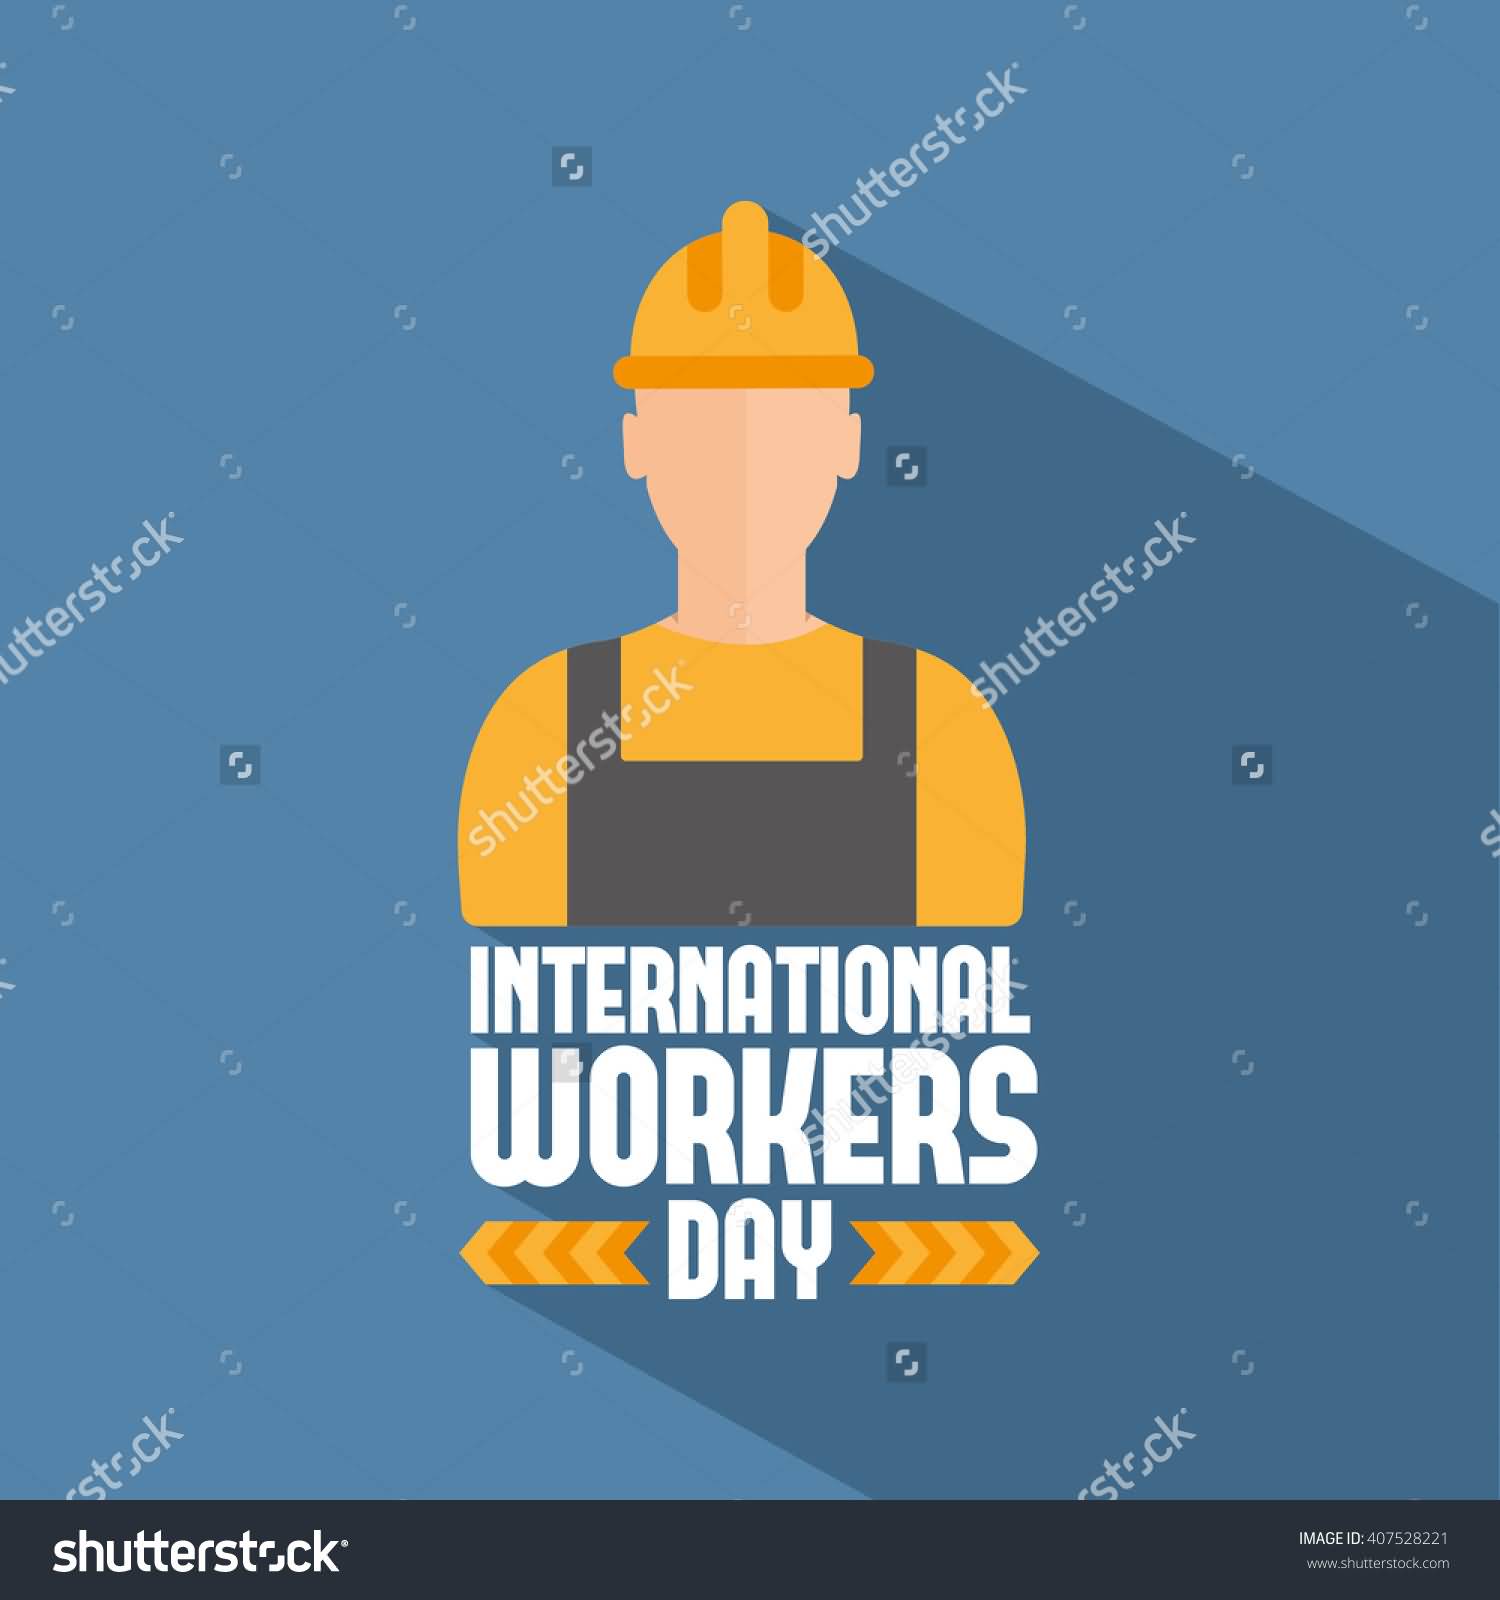 International Workers Day Illustration